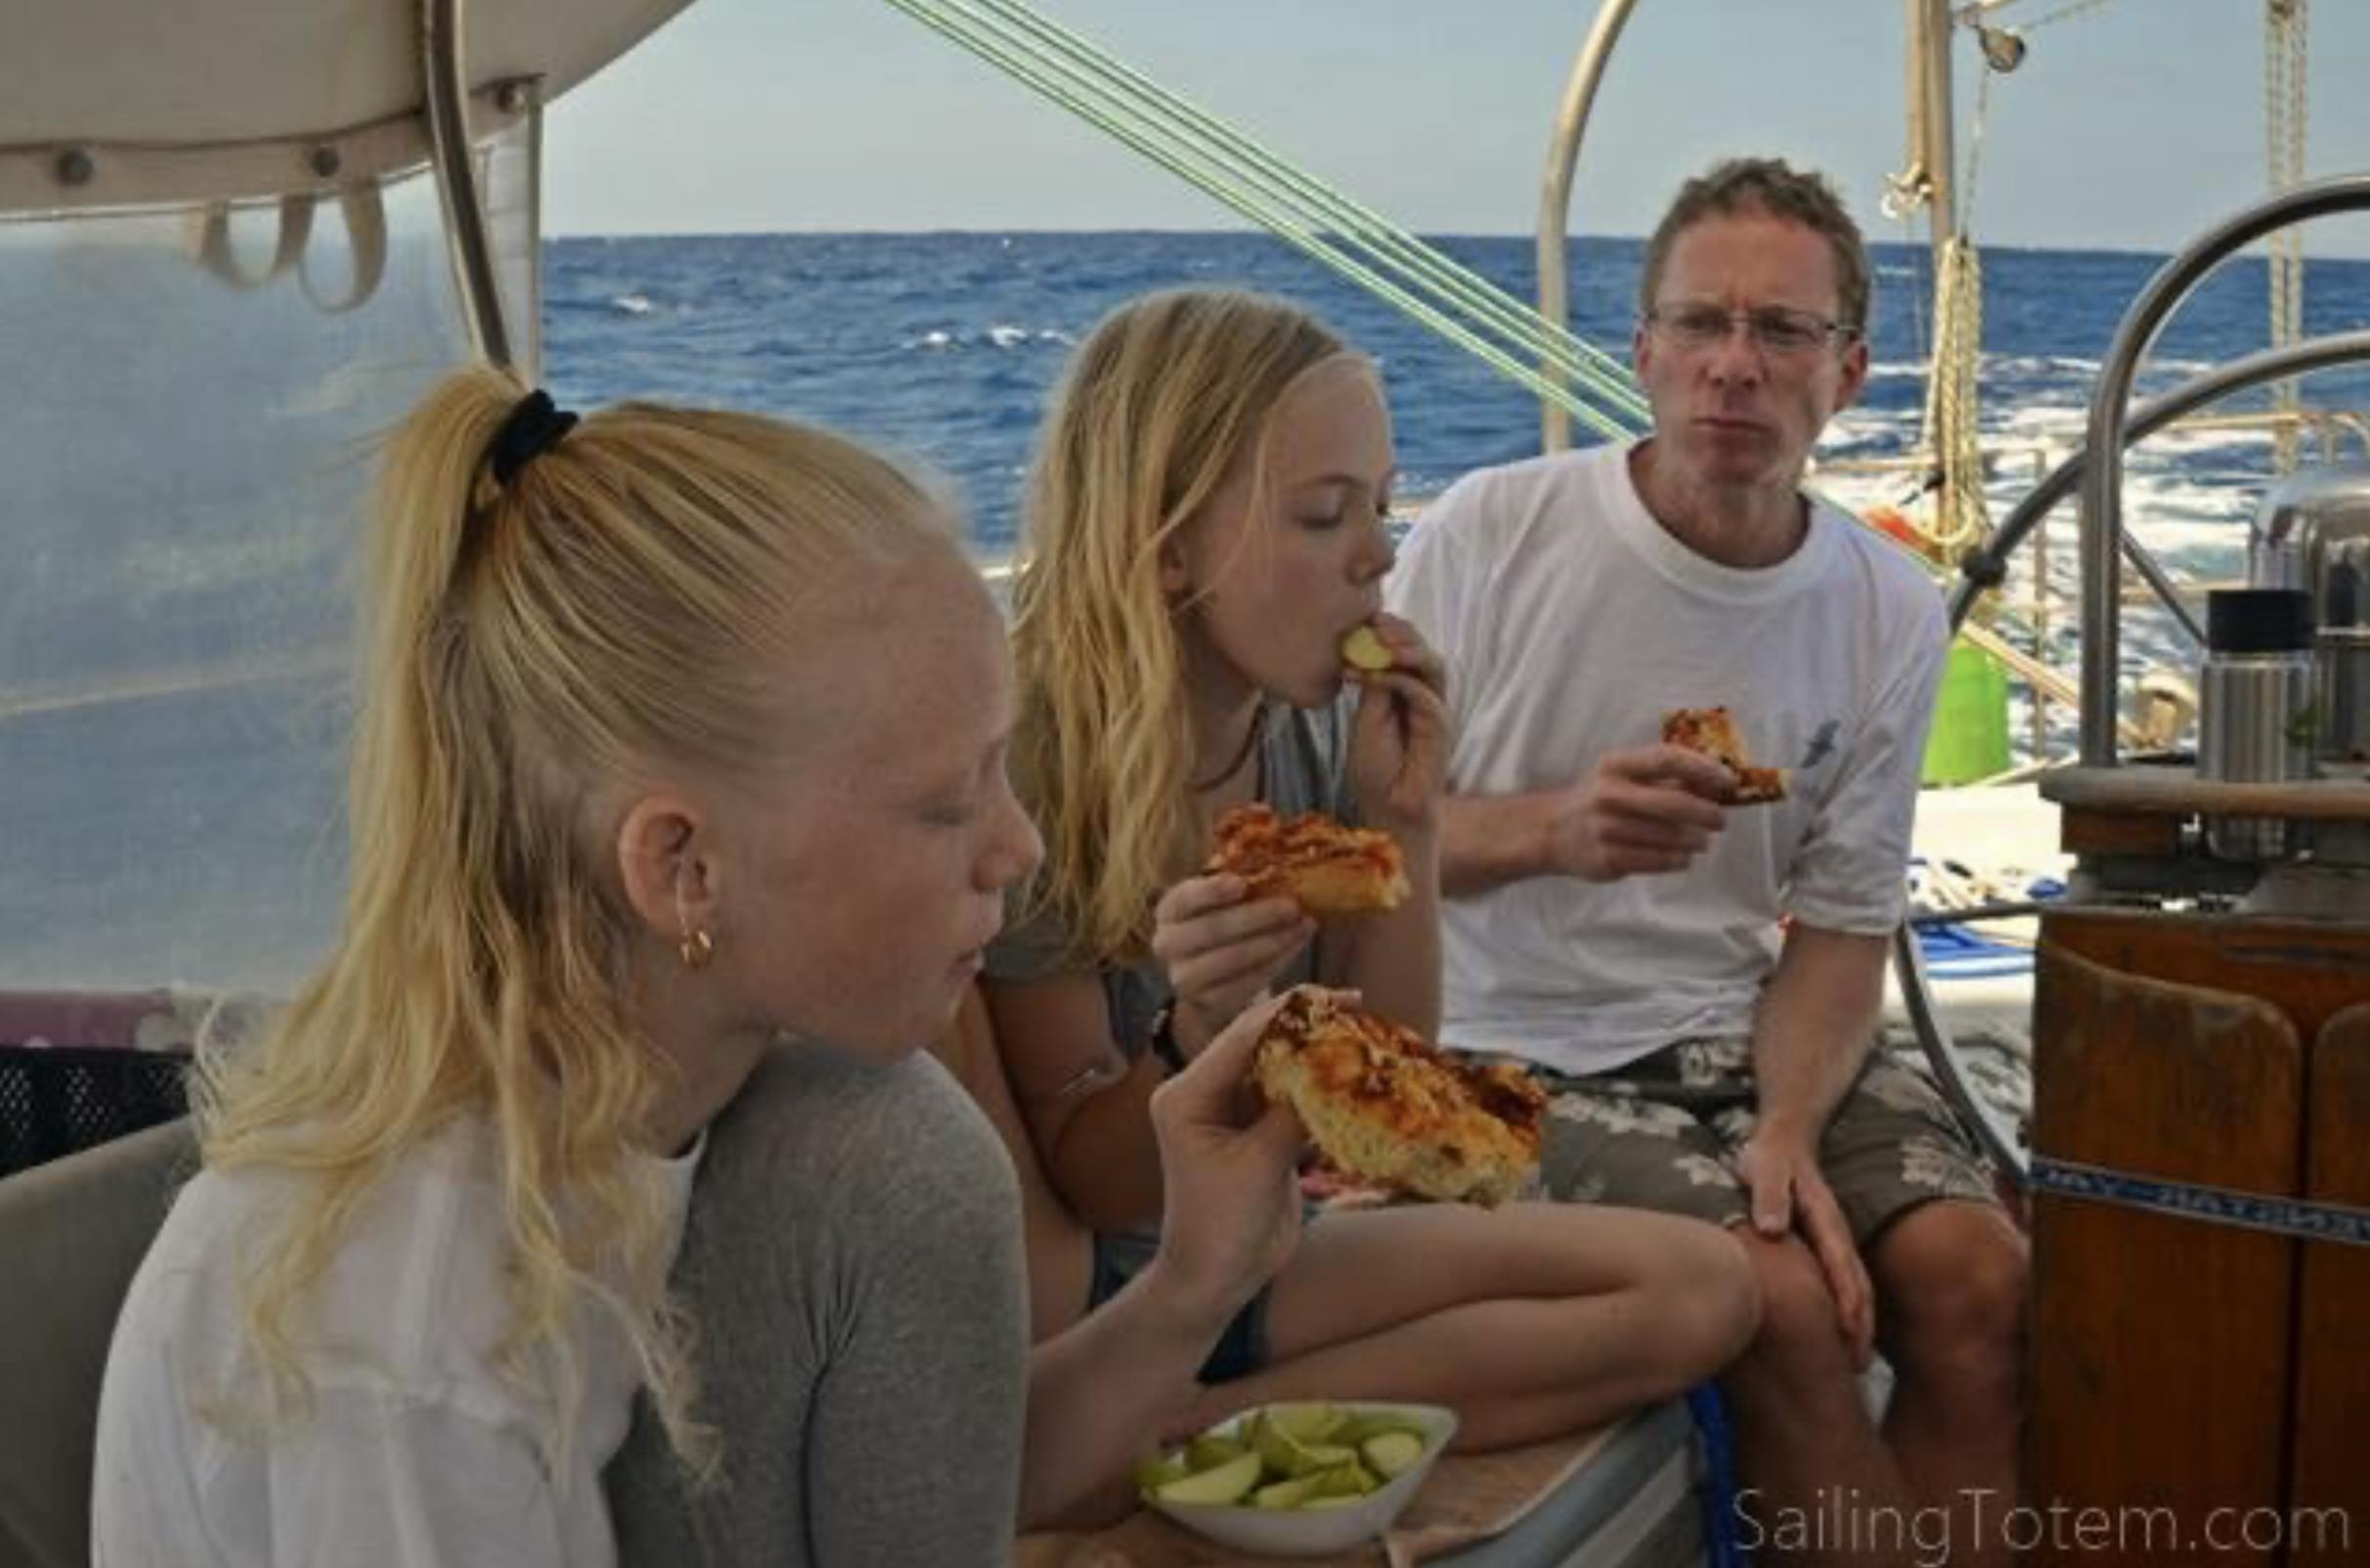 Passage Meals: What We're Eating at Sea